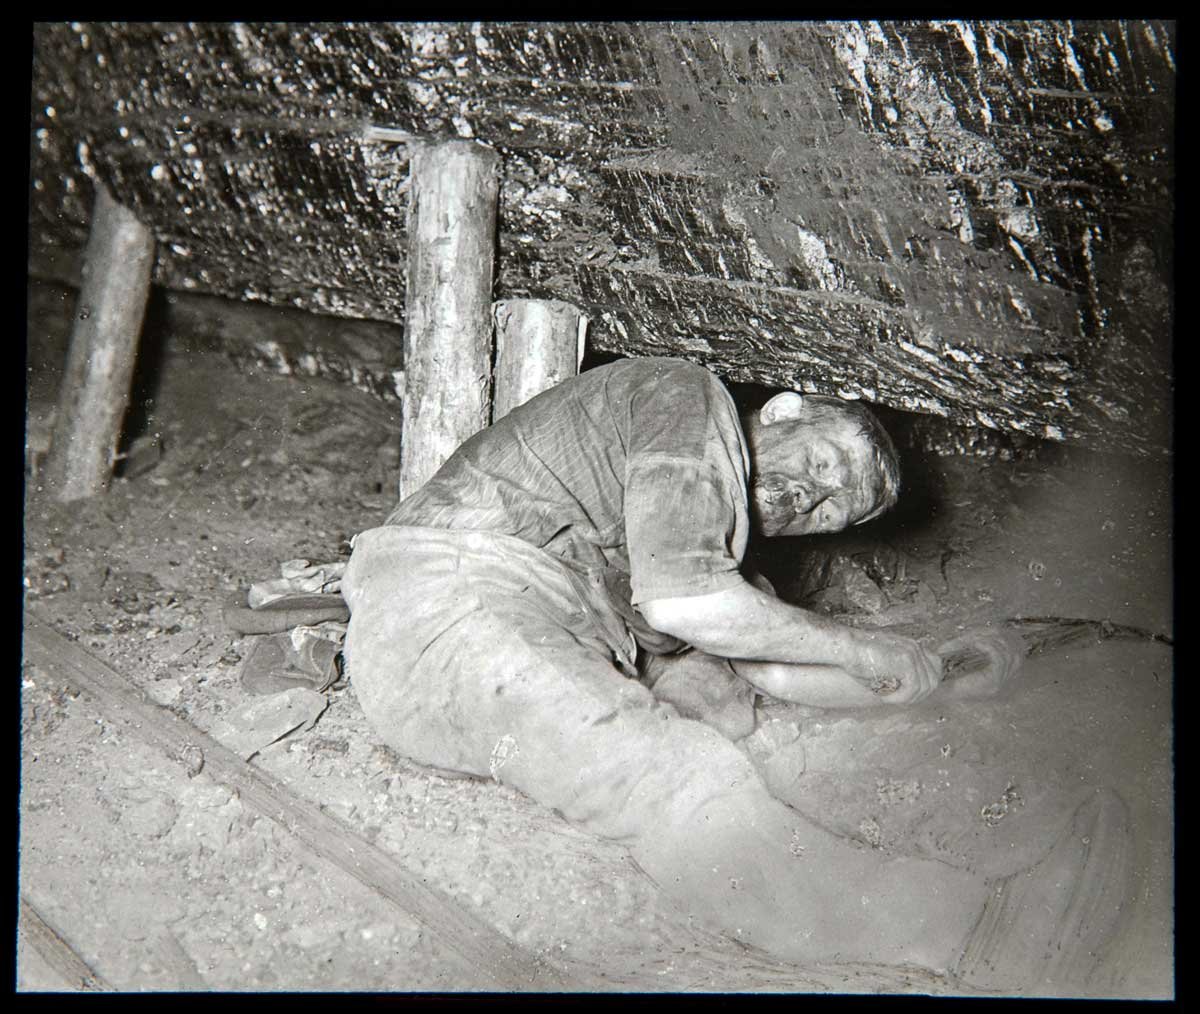 A man lying down under a supported section of cave holding a tool in both hands.